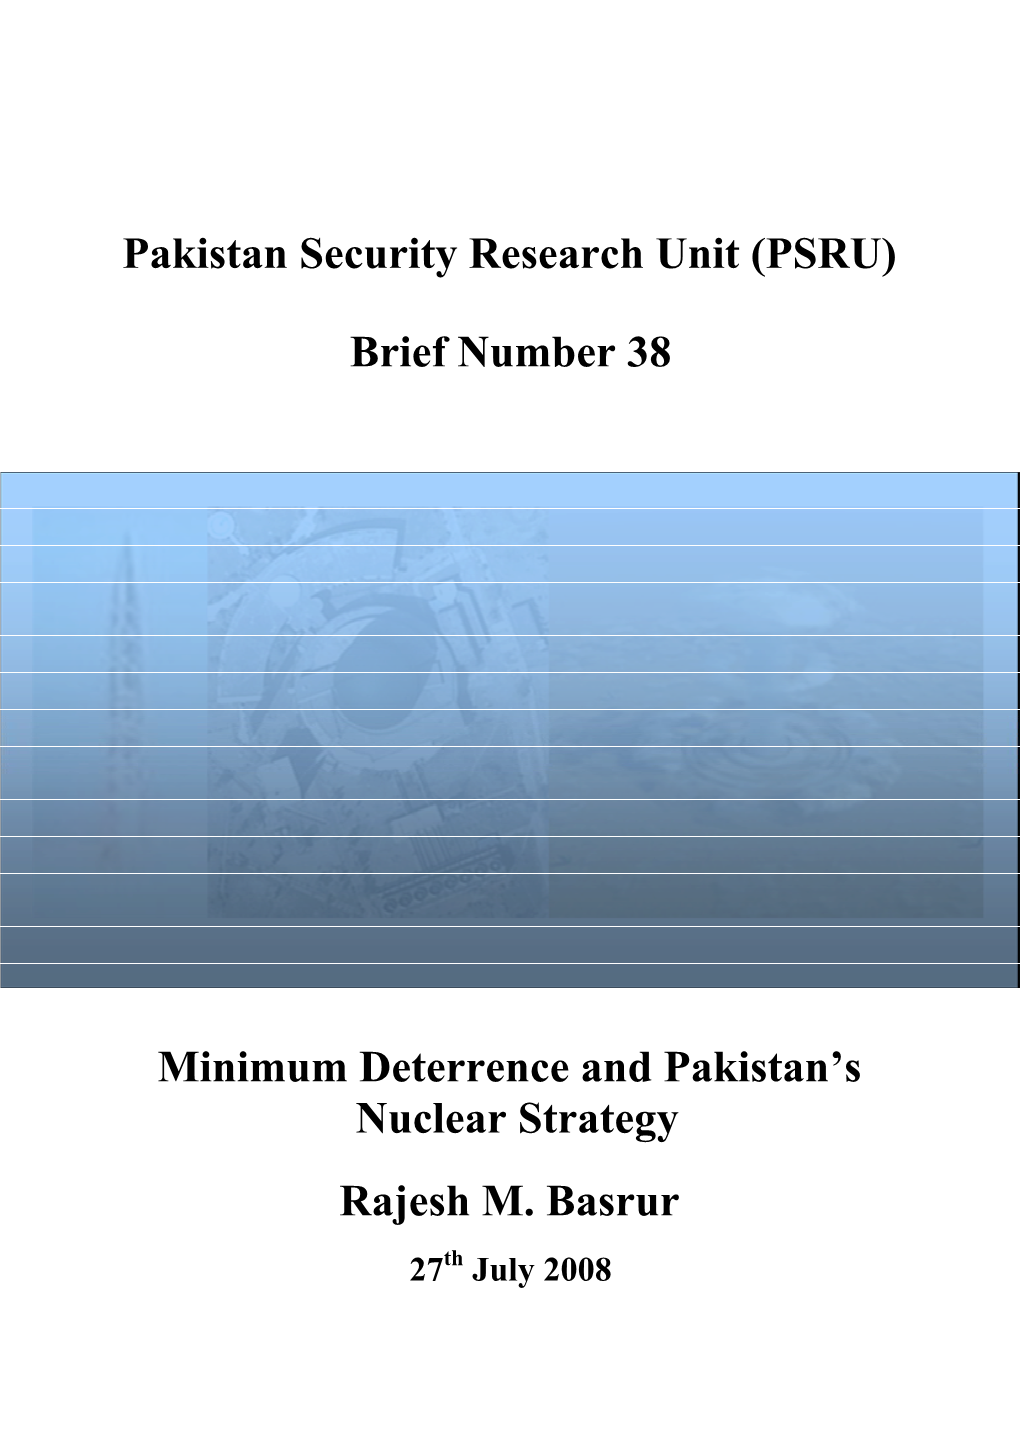 (PSRU) Brief Number 38 Minimum Deterrence and Pakistan's Nuclear